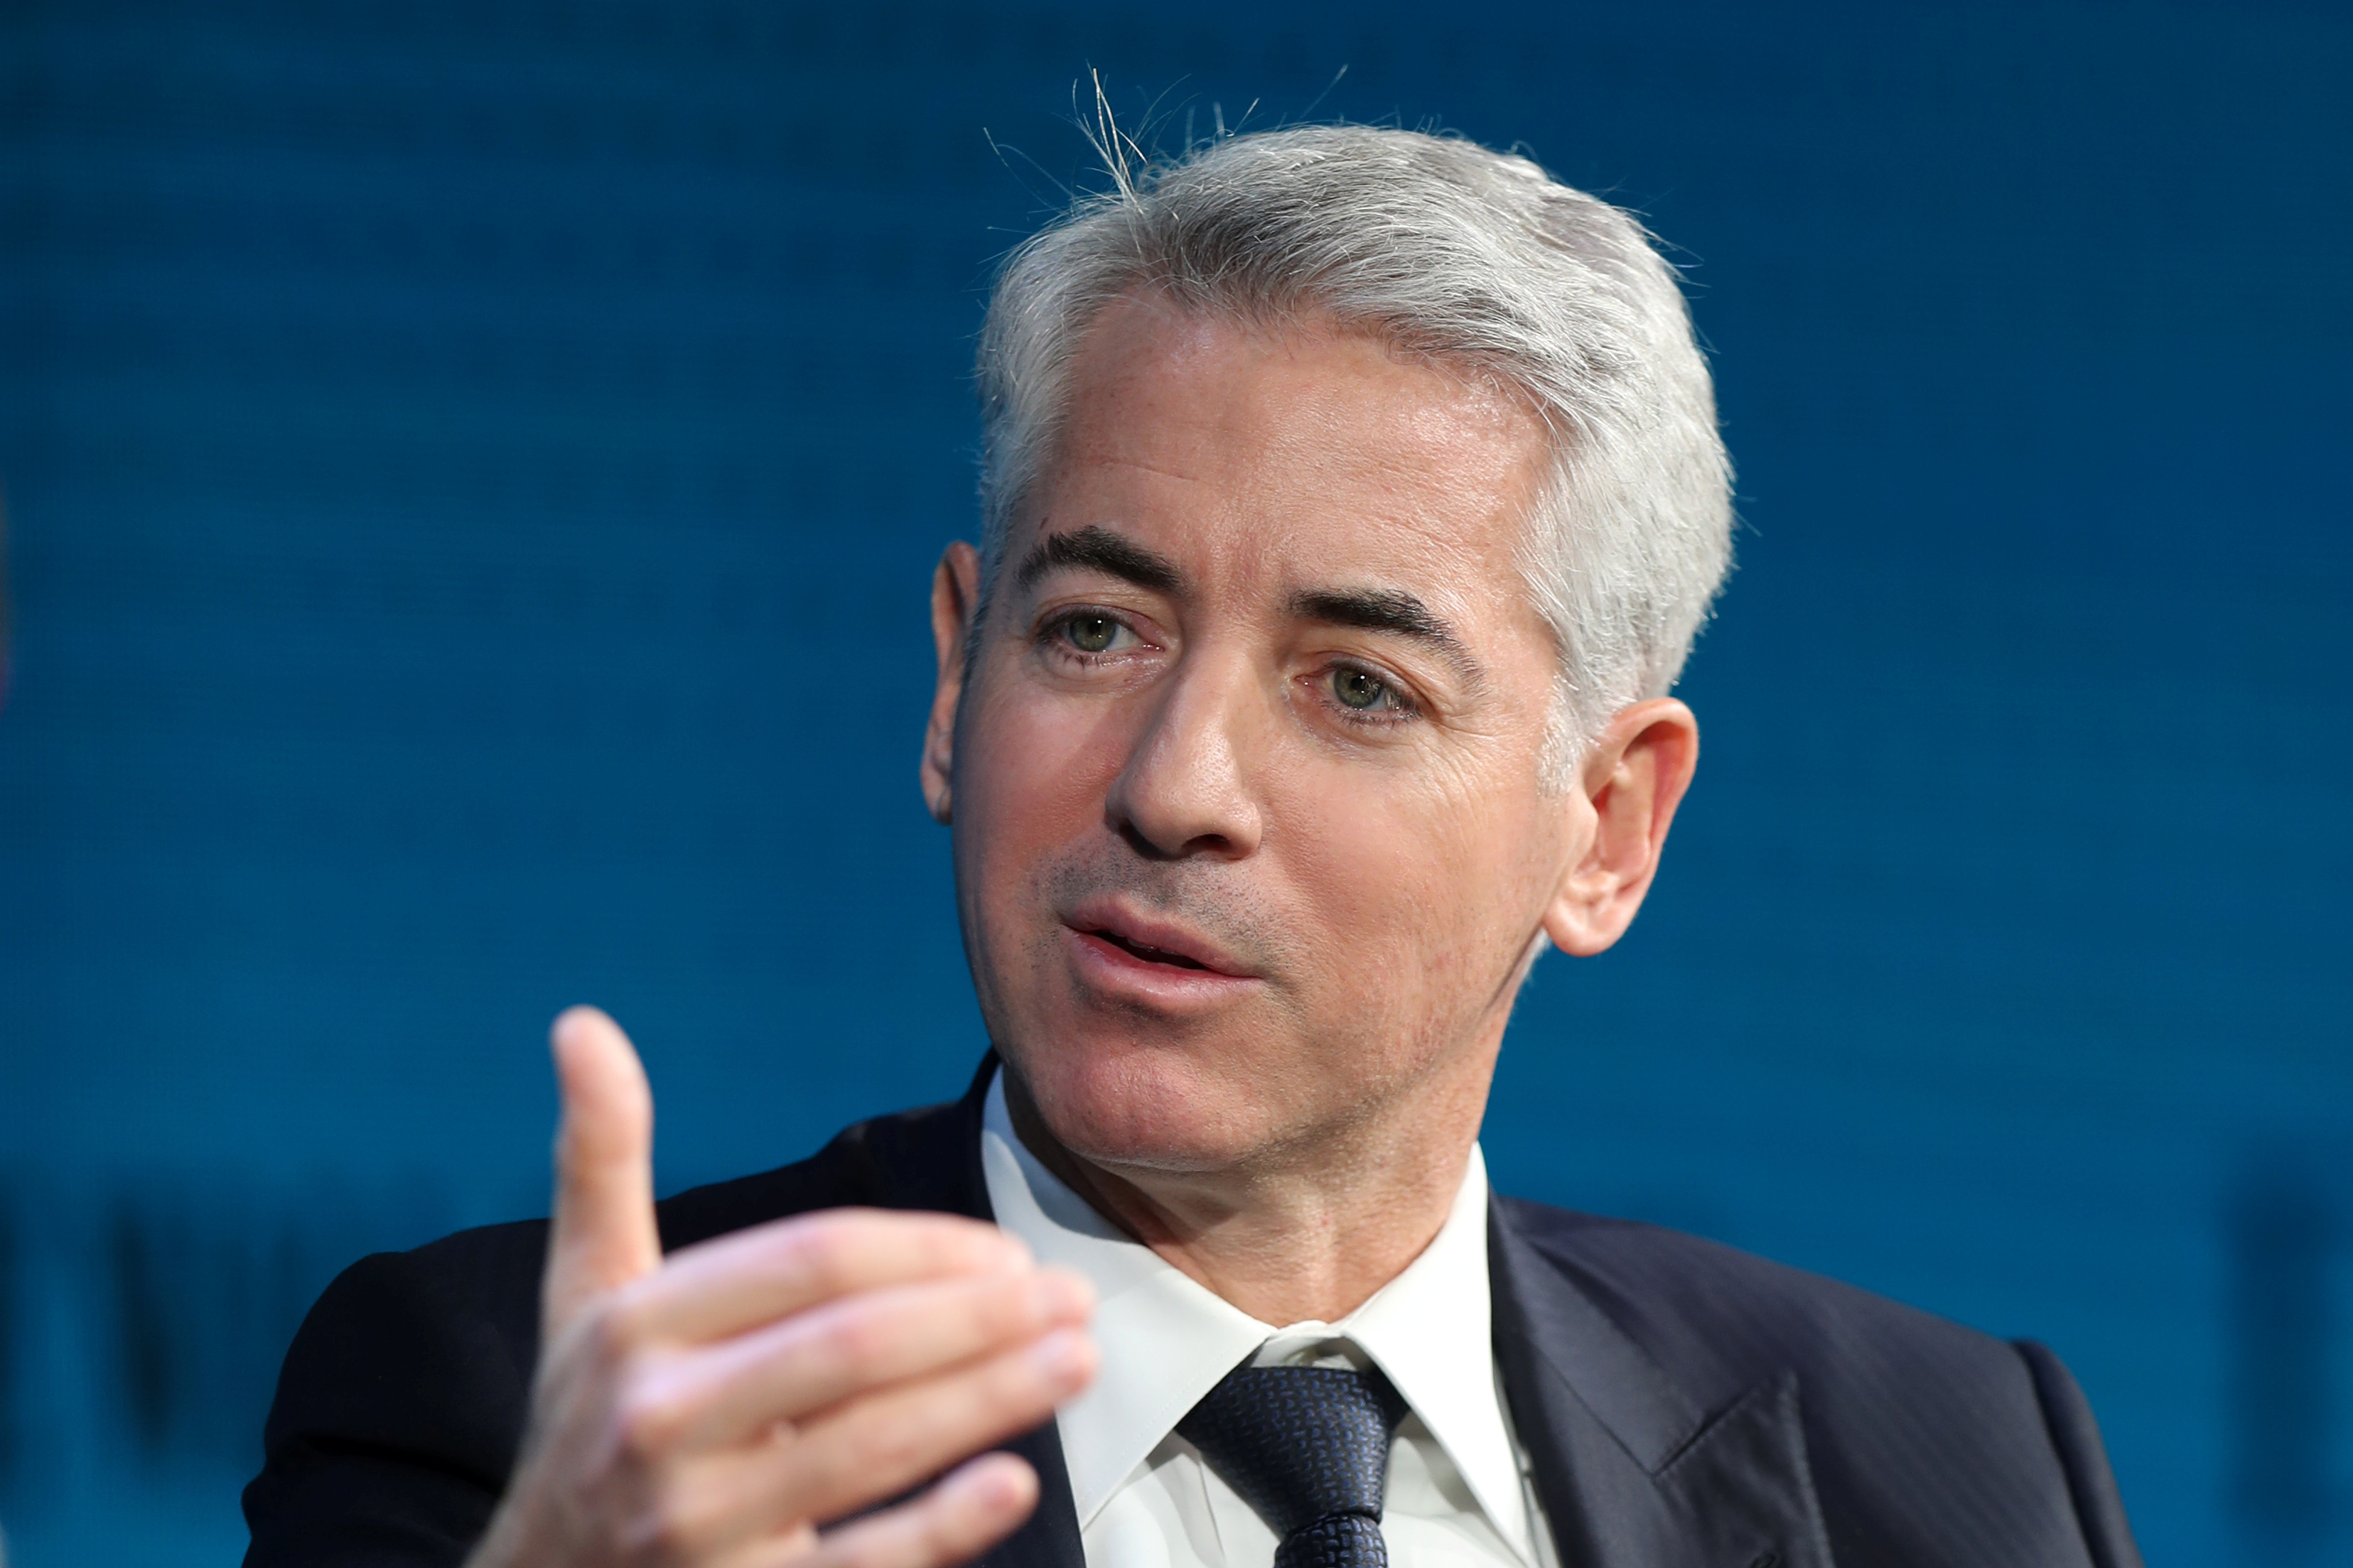 Ackman, CEO of Pershing Square Capital, speaks at the WSJ Digital Conference in Laguna Beach